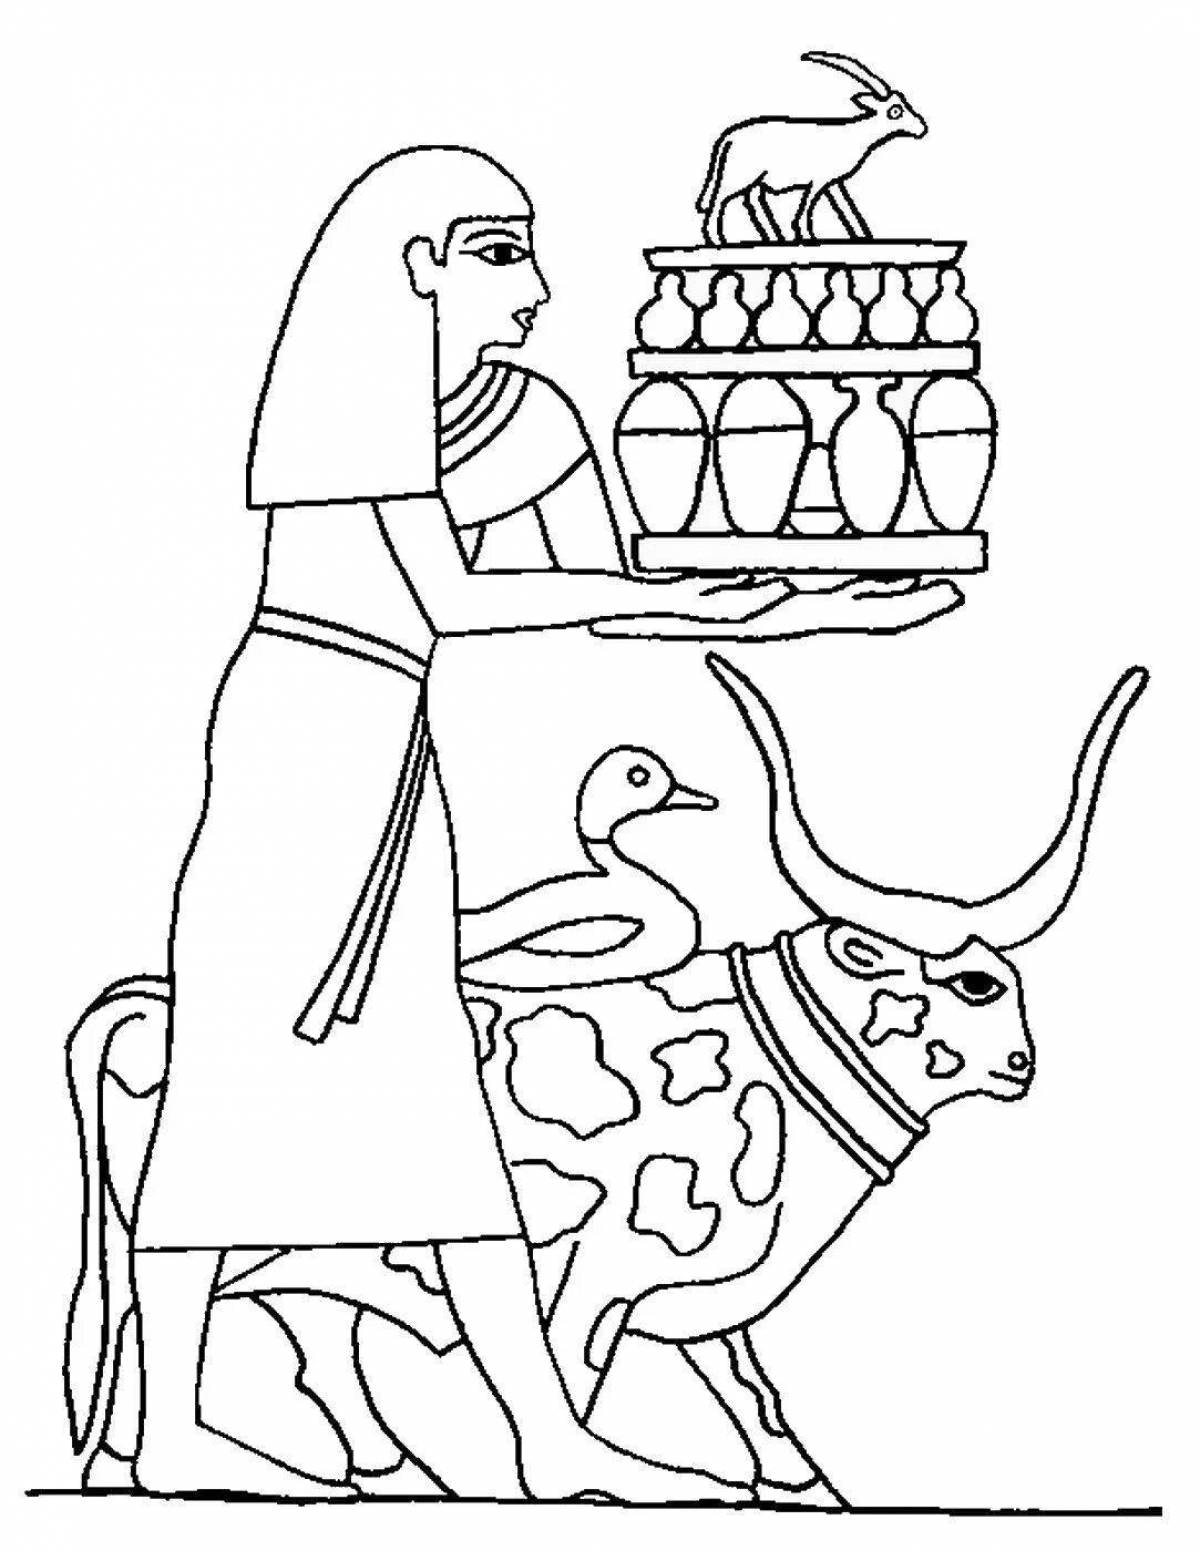 Colorful ancient egypt coloring book for kids